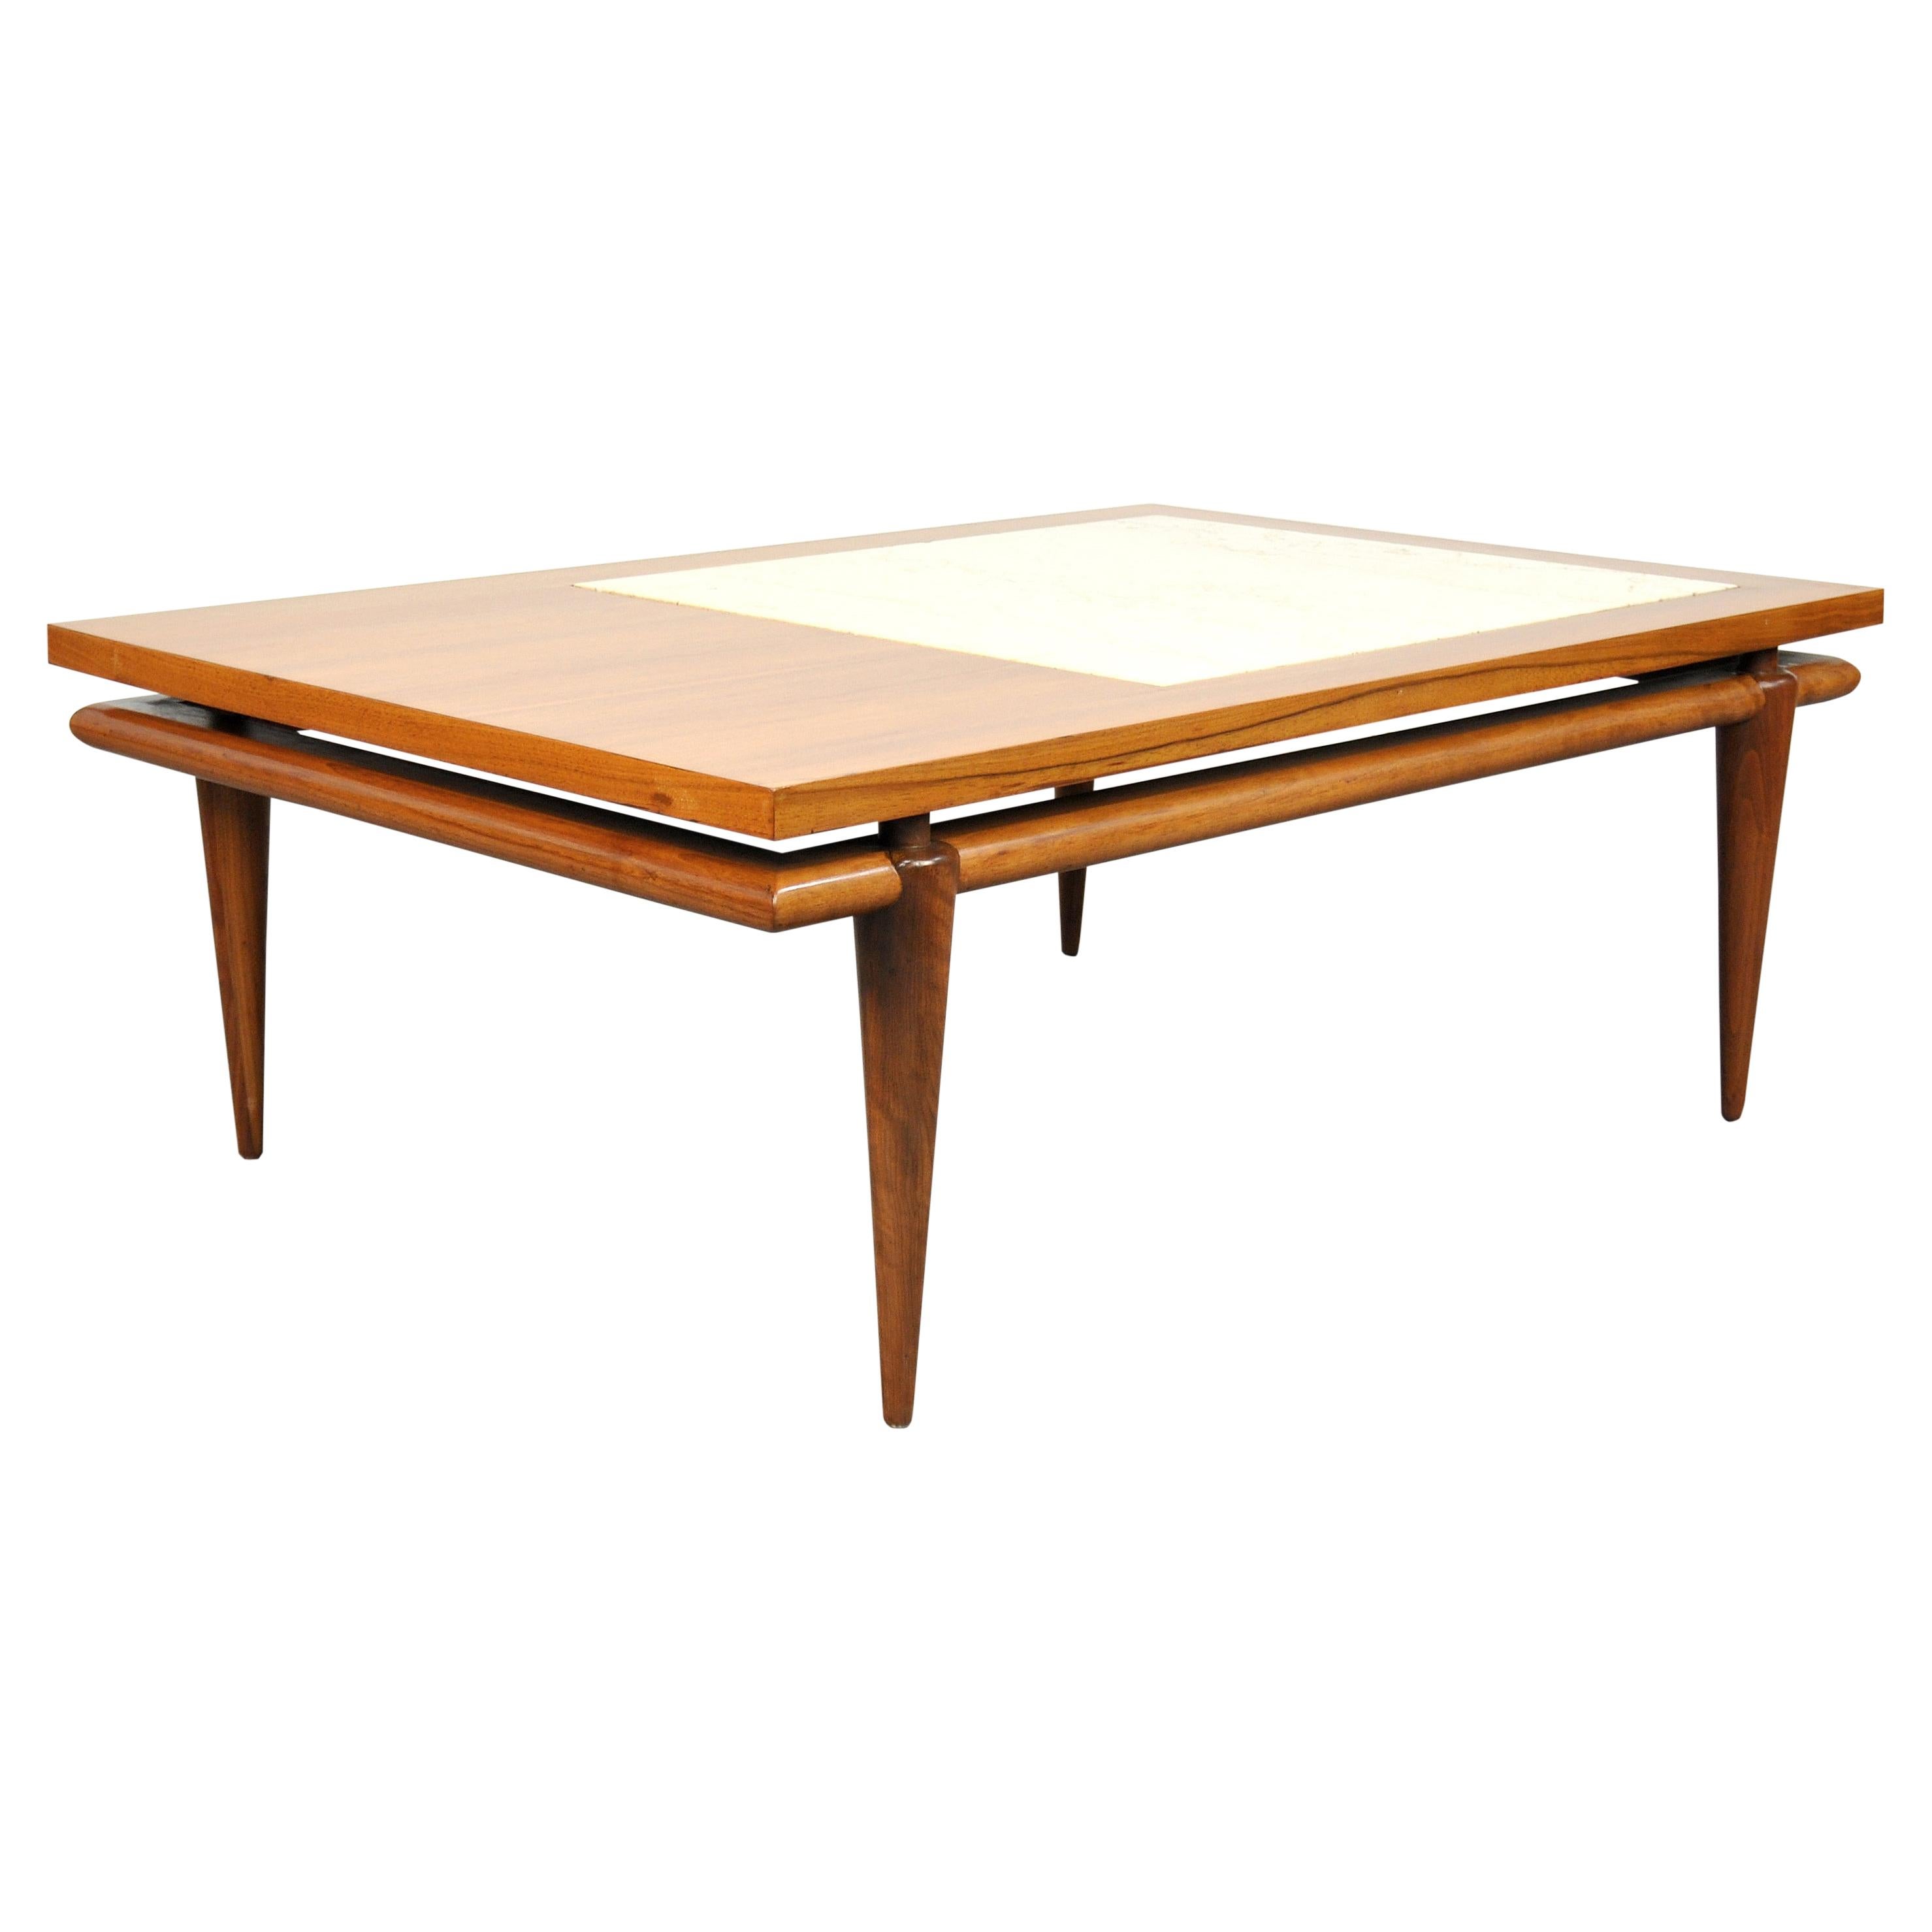 A gorgeous vintage walnut and travertine marble midcentury modern cocktail table, possibly designed by Robsjohn-Gibbings and manufactured by Widdicomb. The table features a rectangular top with inset white travertine marble floating over a base with